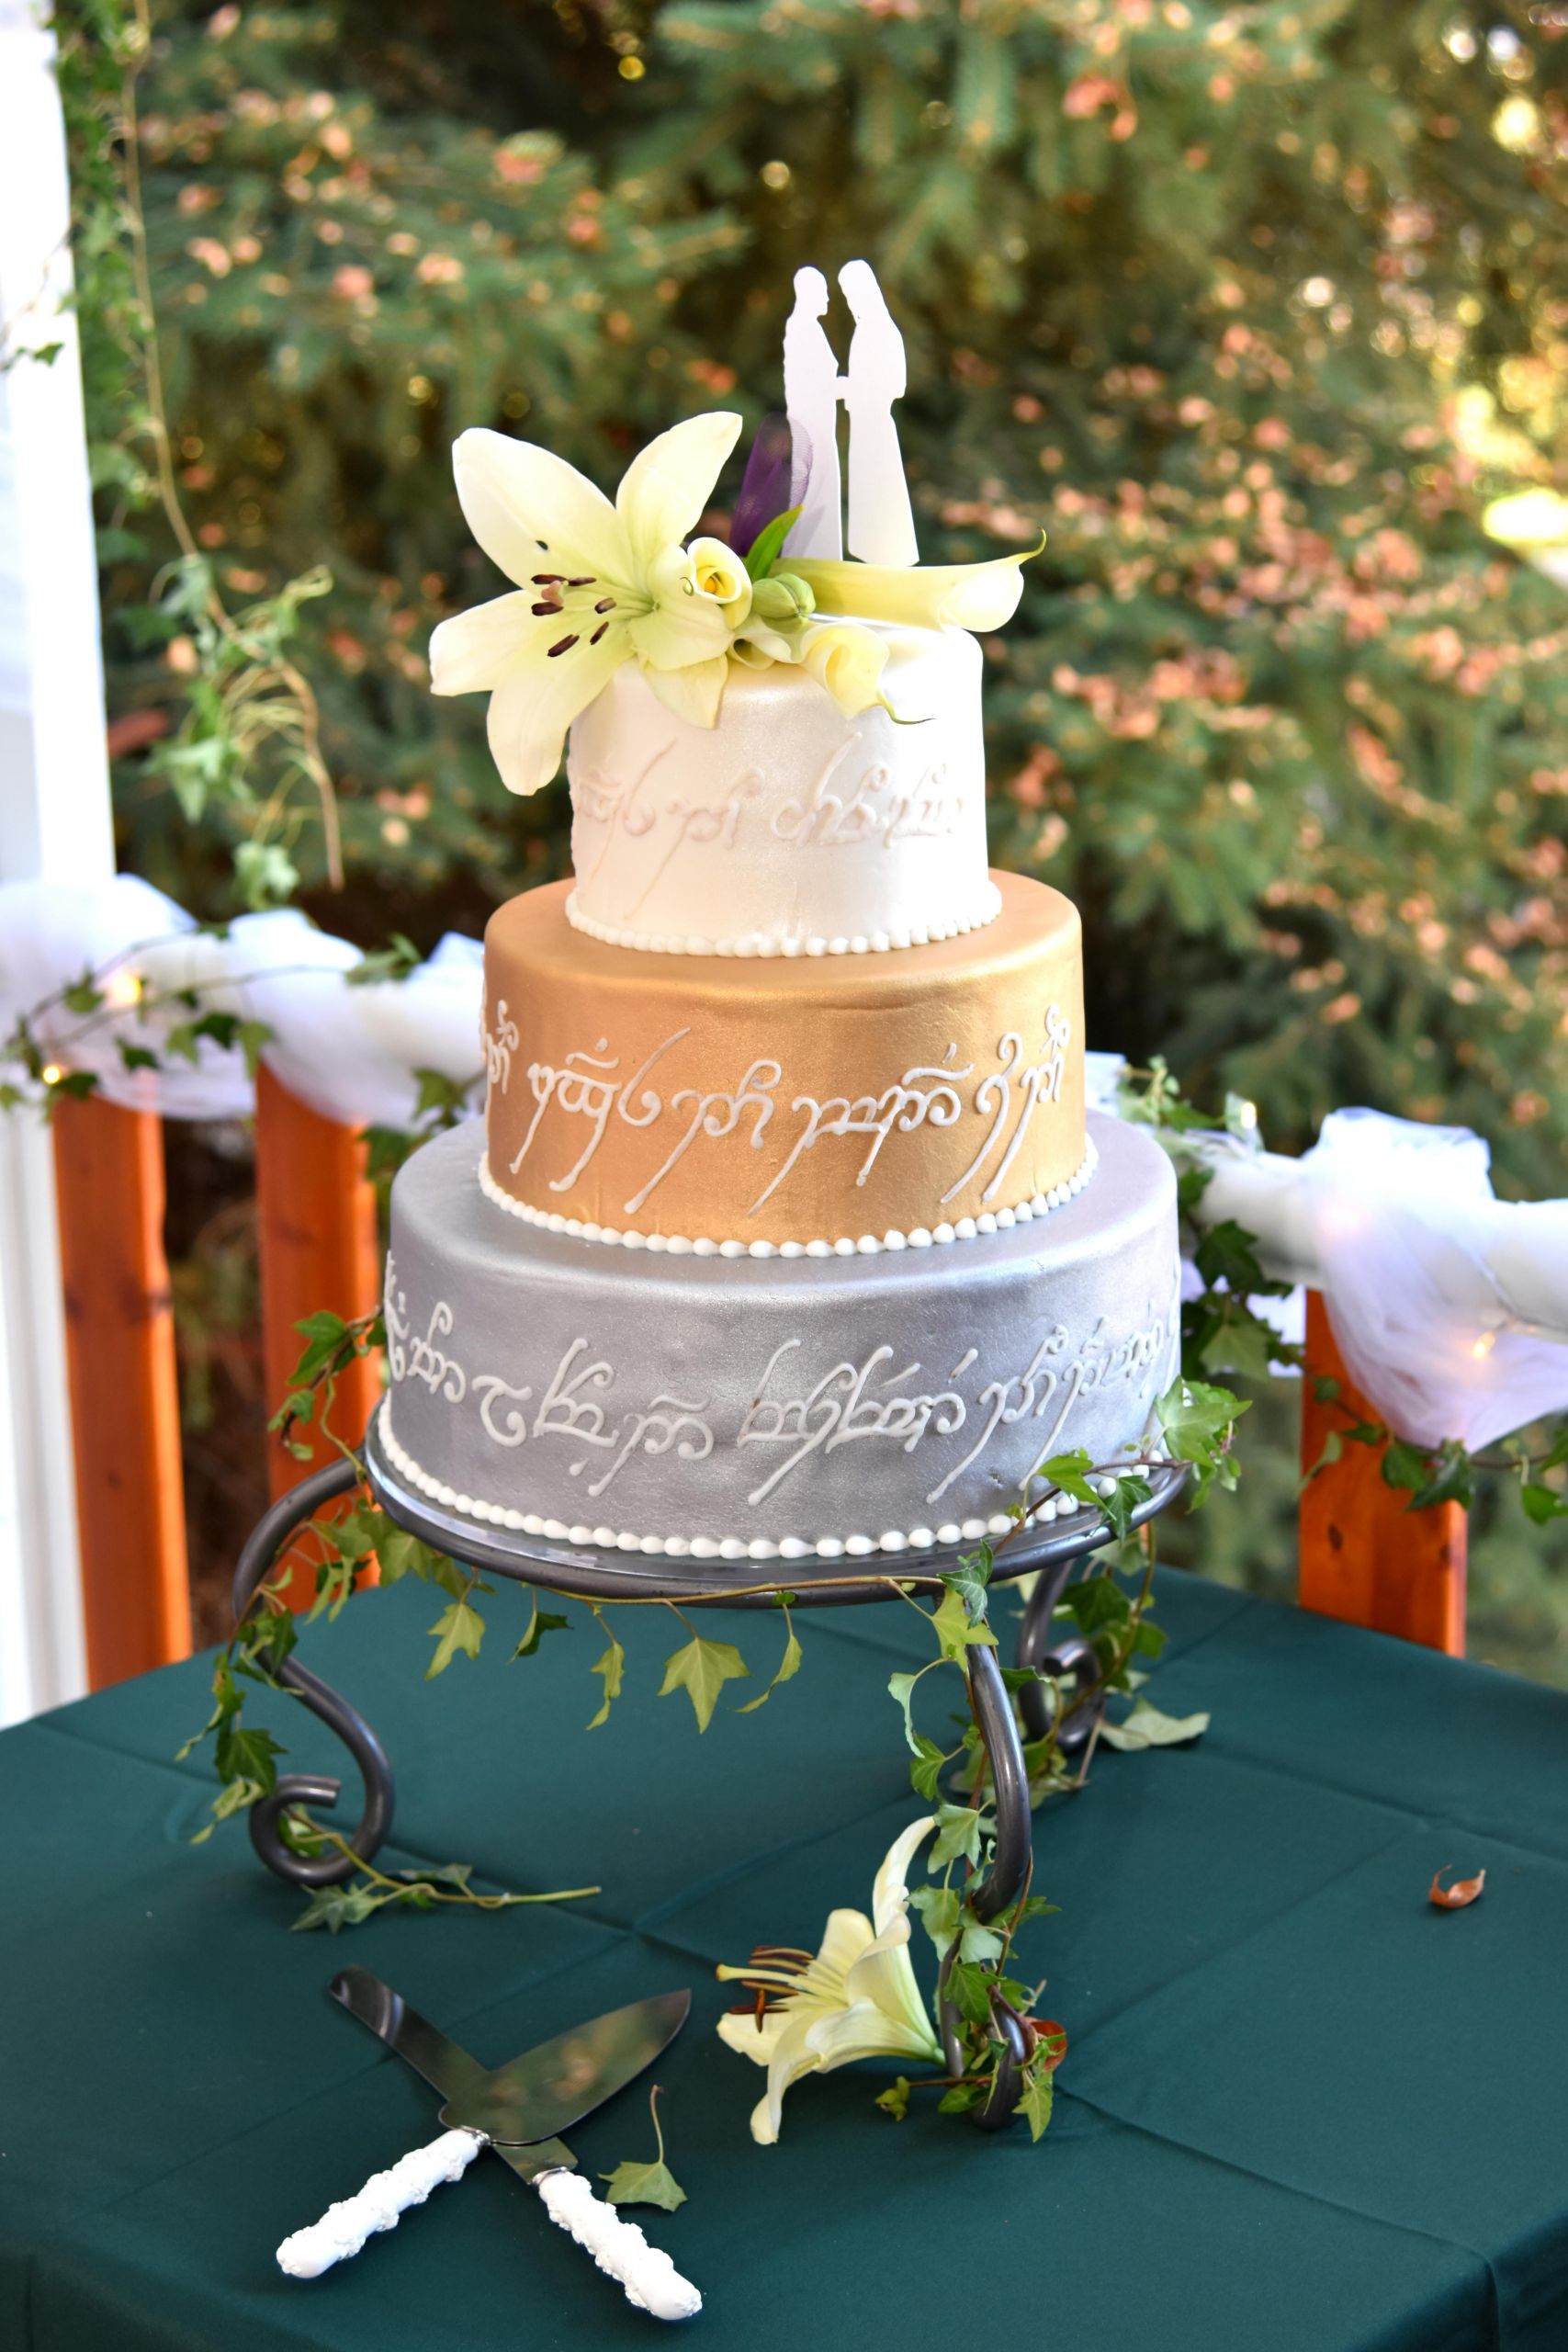 Lord Of The Rings Wedding Cake
 The cake with an elvish love poem for my Lord of The Rings